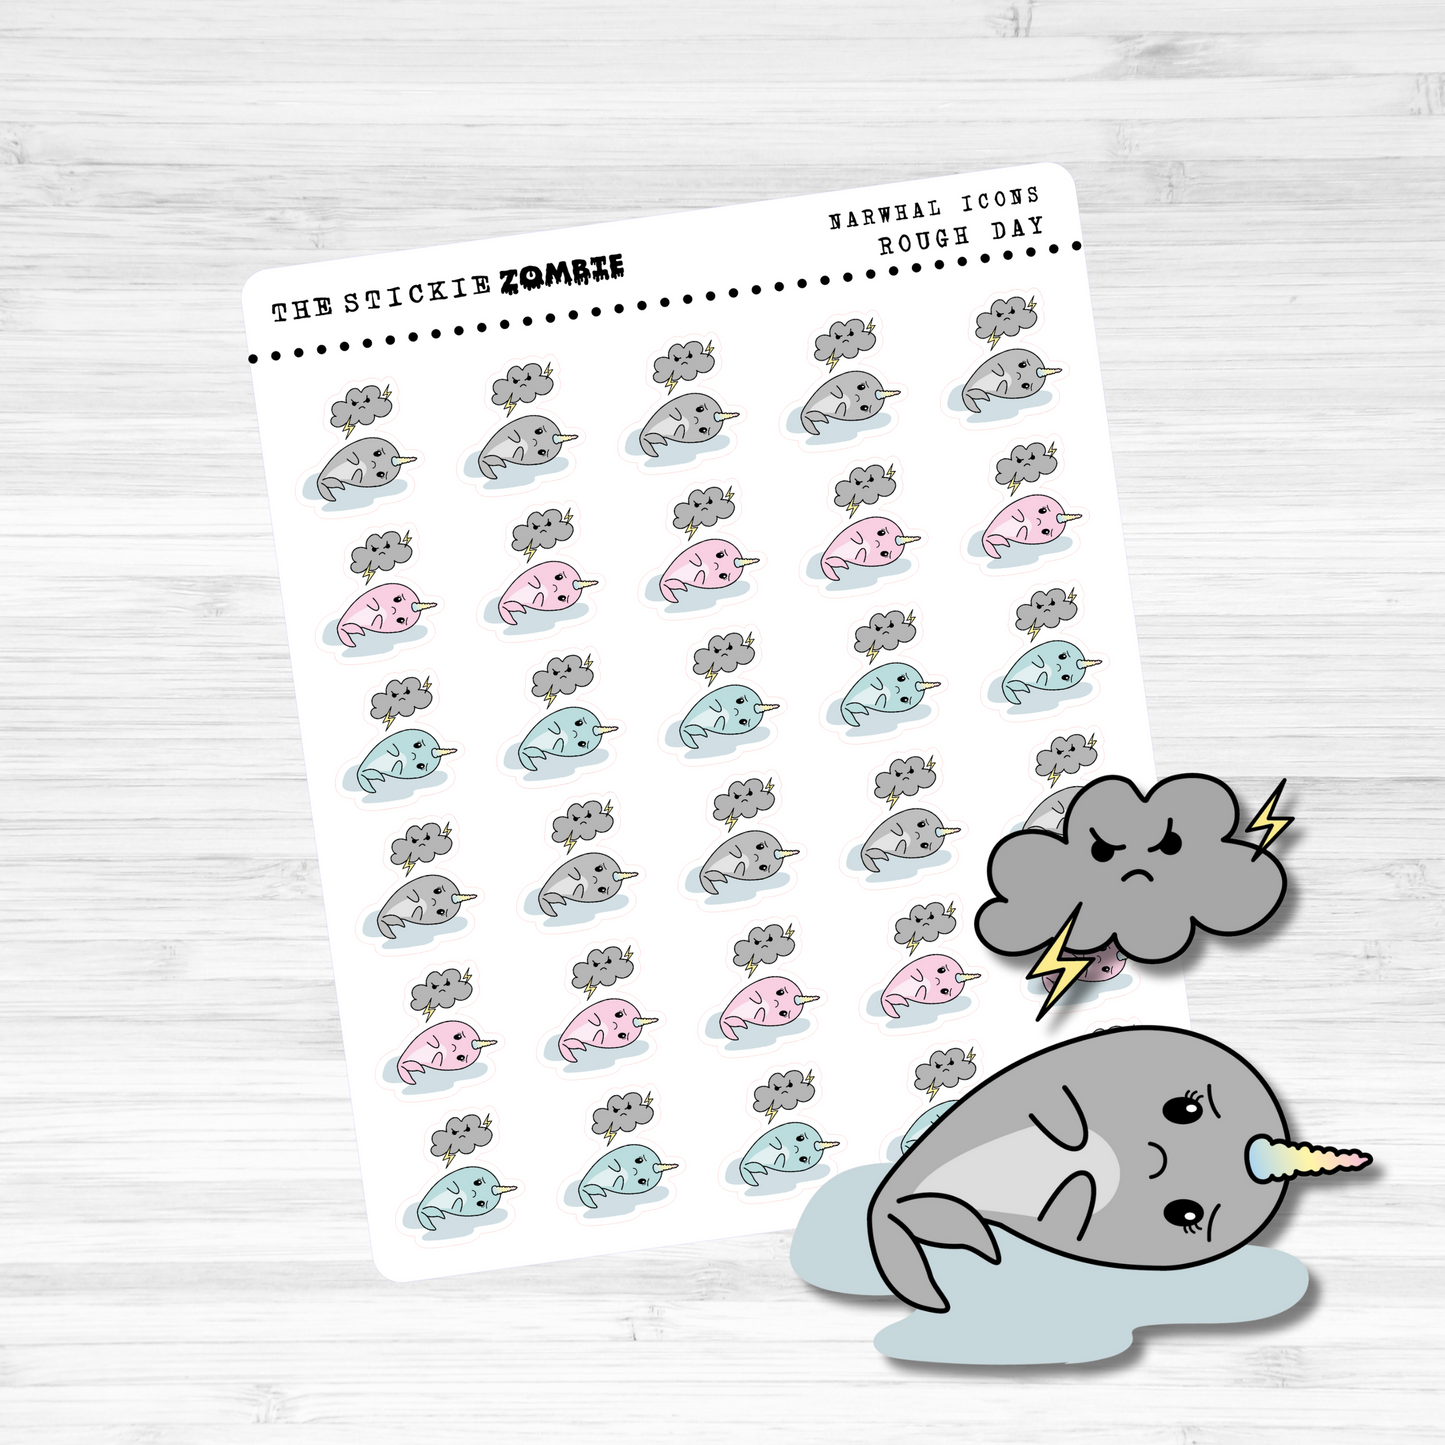 Icons / Narwhal / Rough Day